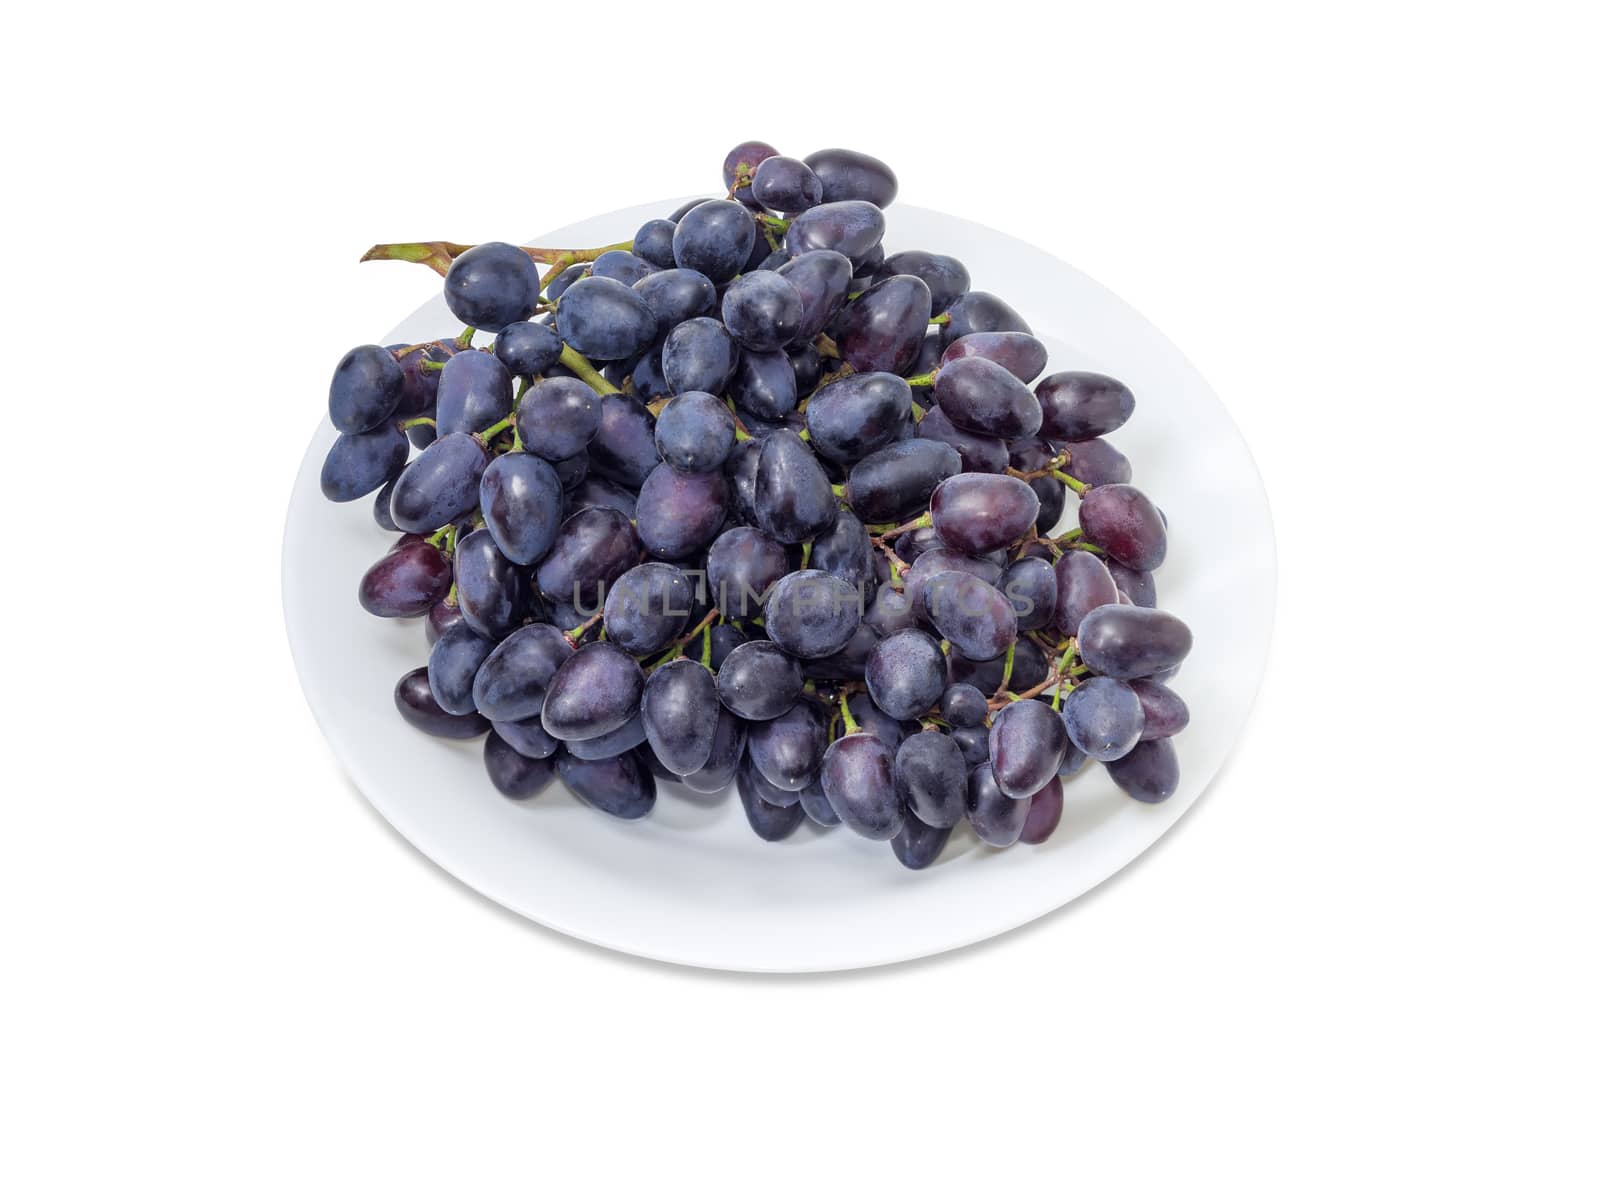 Big cluster of the ripe dark blue table grapes on a white dish aon a white background
